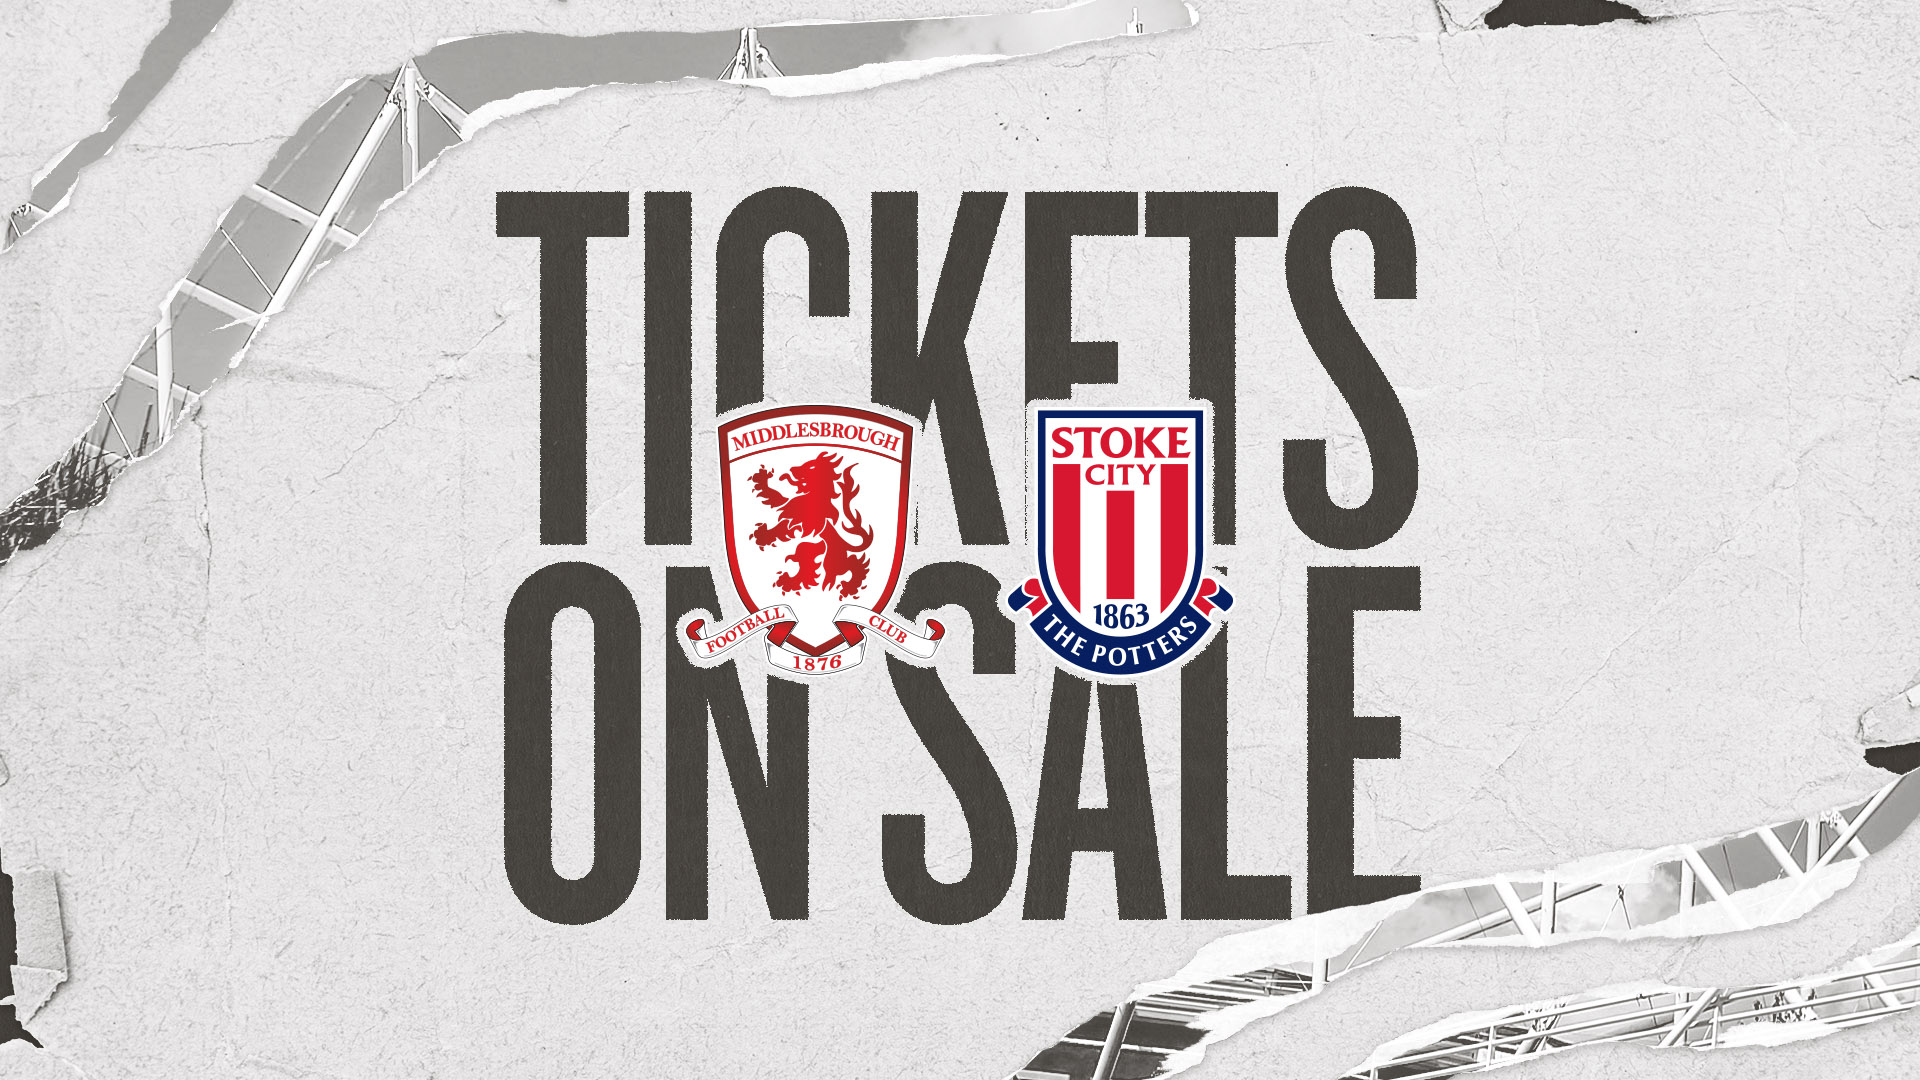 Tickets on sale graphic - Middlesbrough and Stoke City